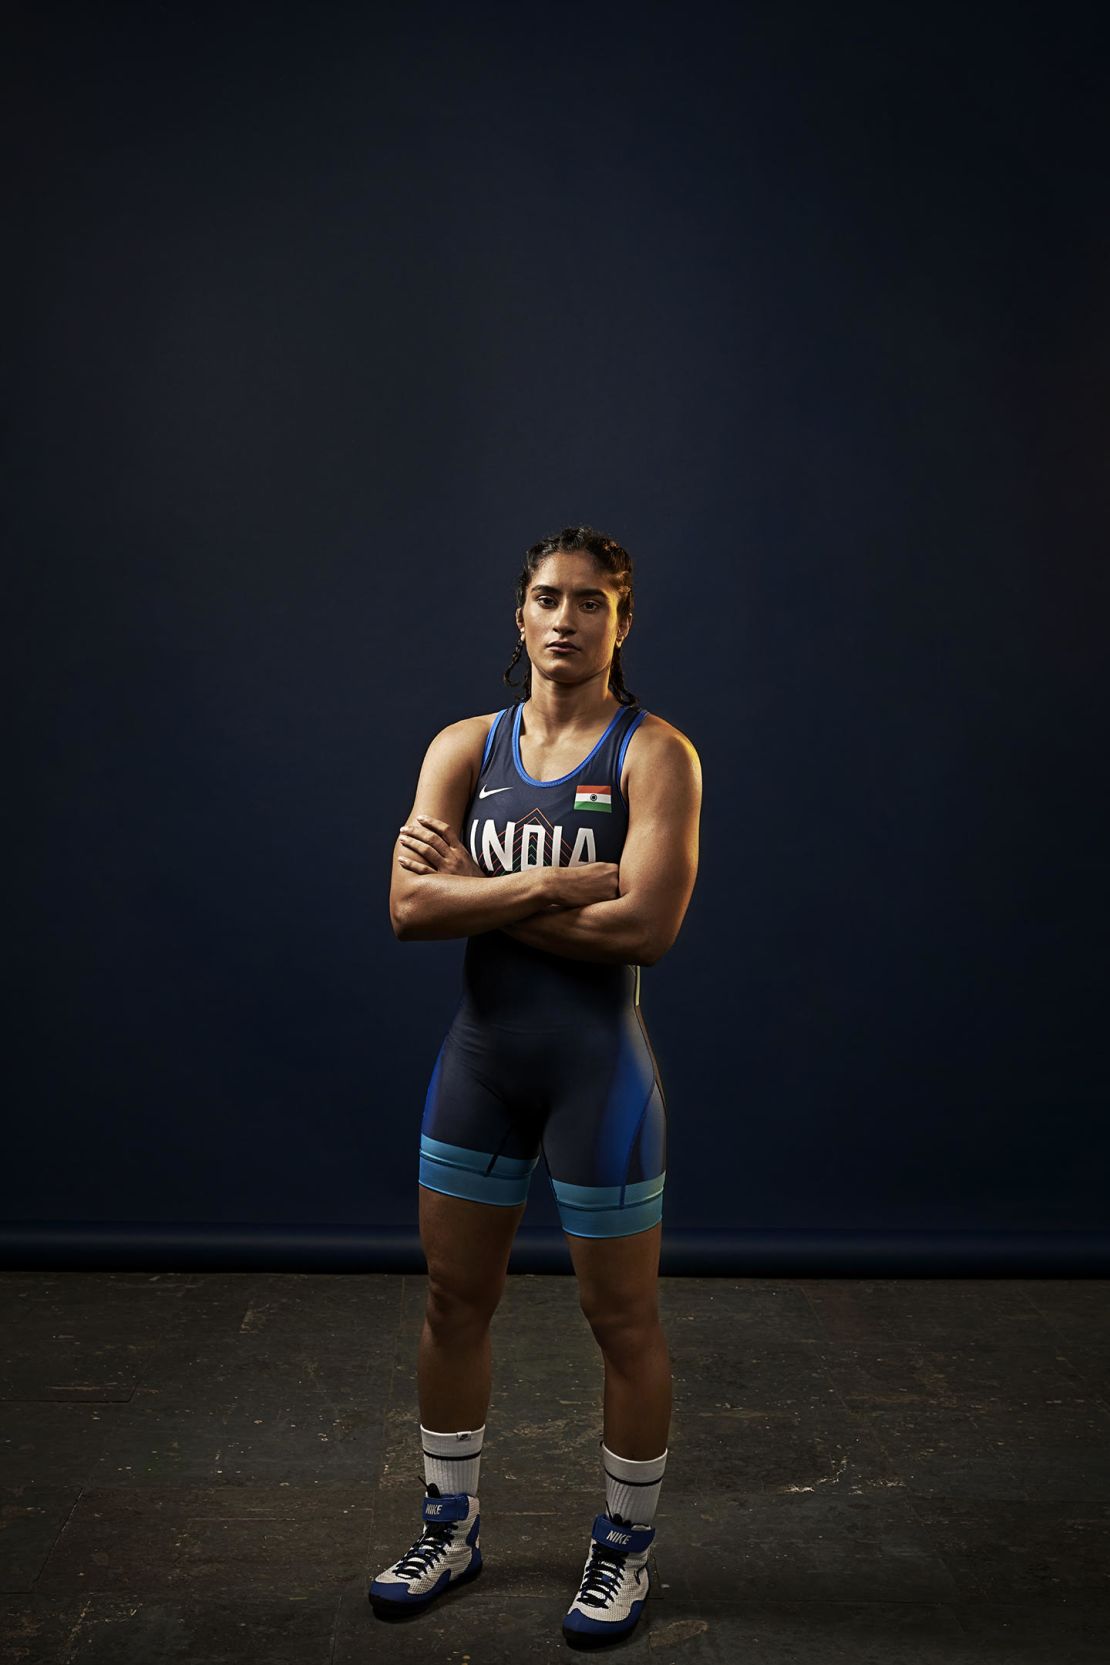 Vinesh Phogat made a full recovery and will be a gold medal favorite in Tokyo.